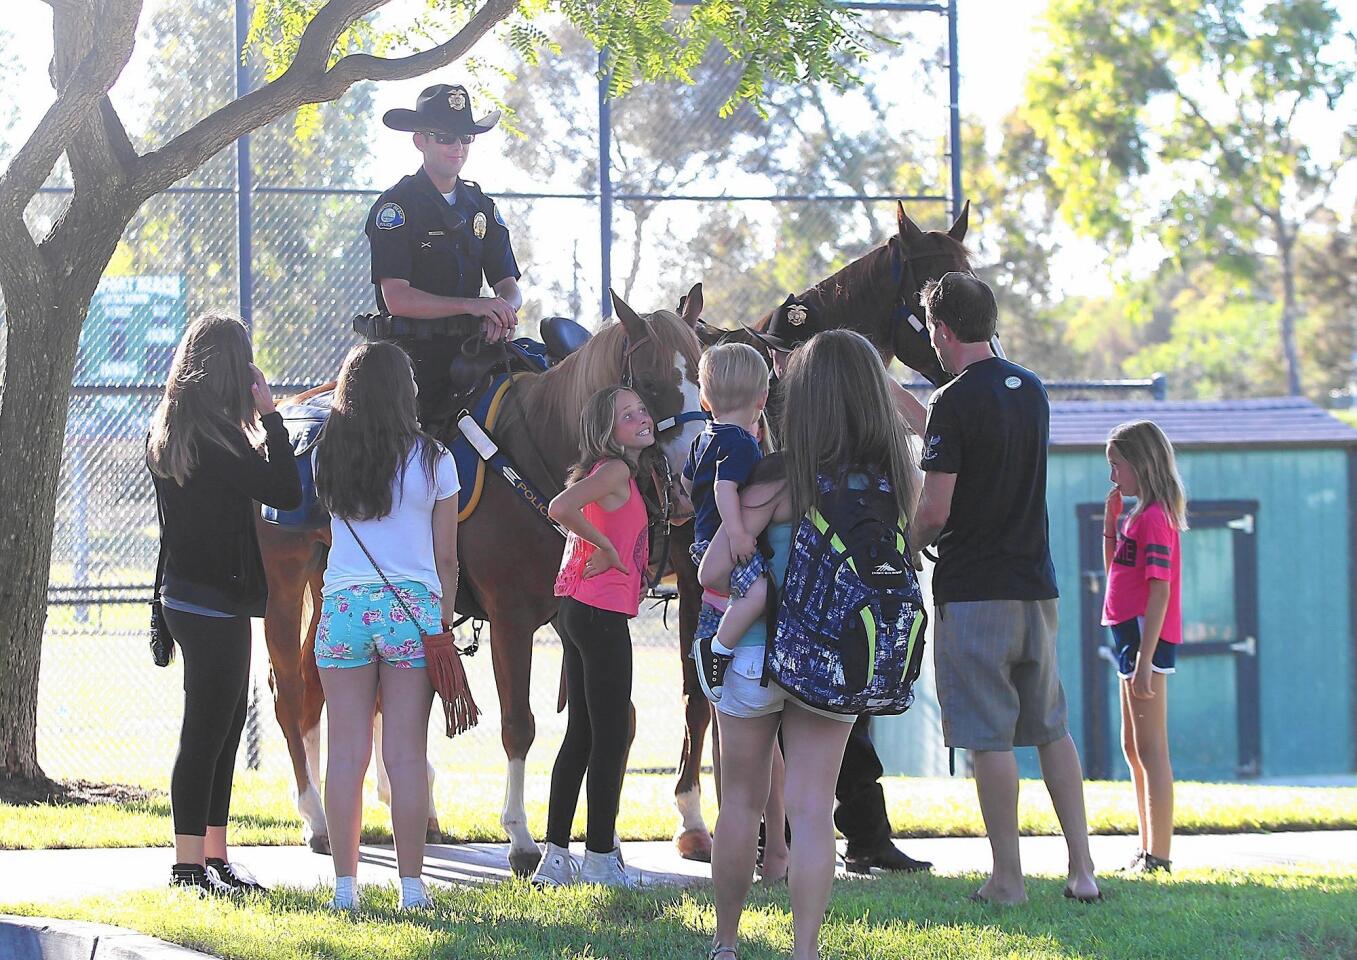 Guests gather around Officer Shawn Dugan and his horse Levi at Tuesday's National Night Out event at Bonita Canyon Sports Park in Newport Beach. The event promotes relationships between police and neighborhoods.